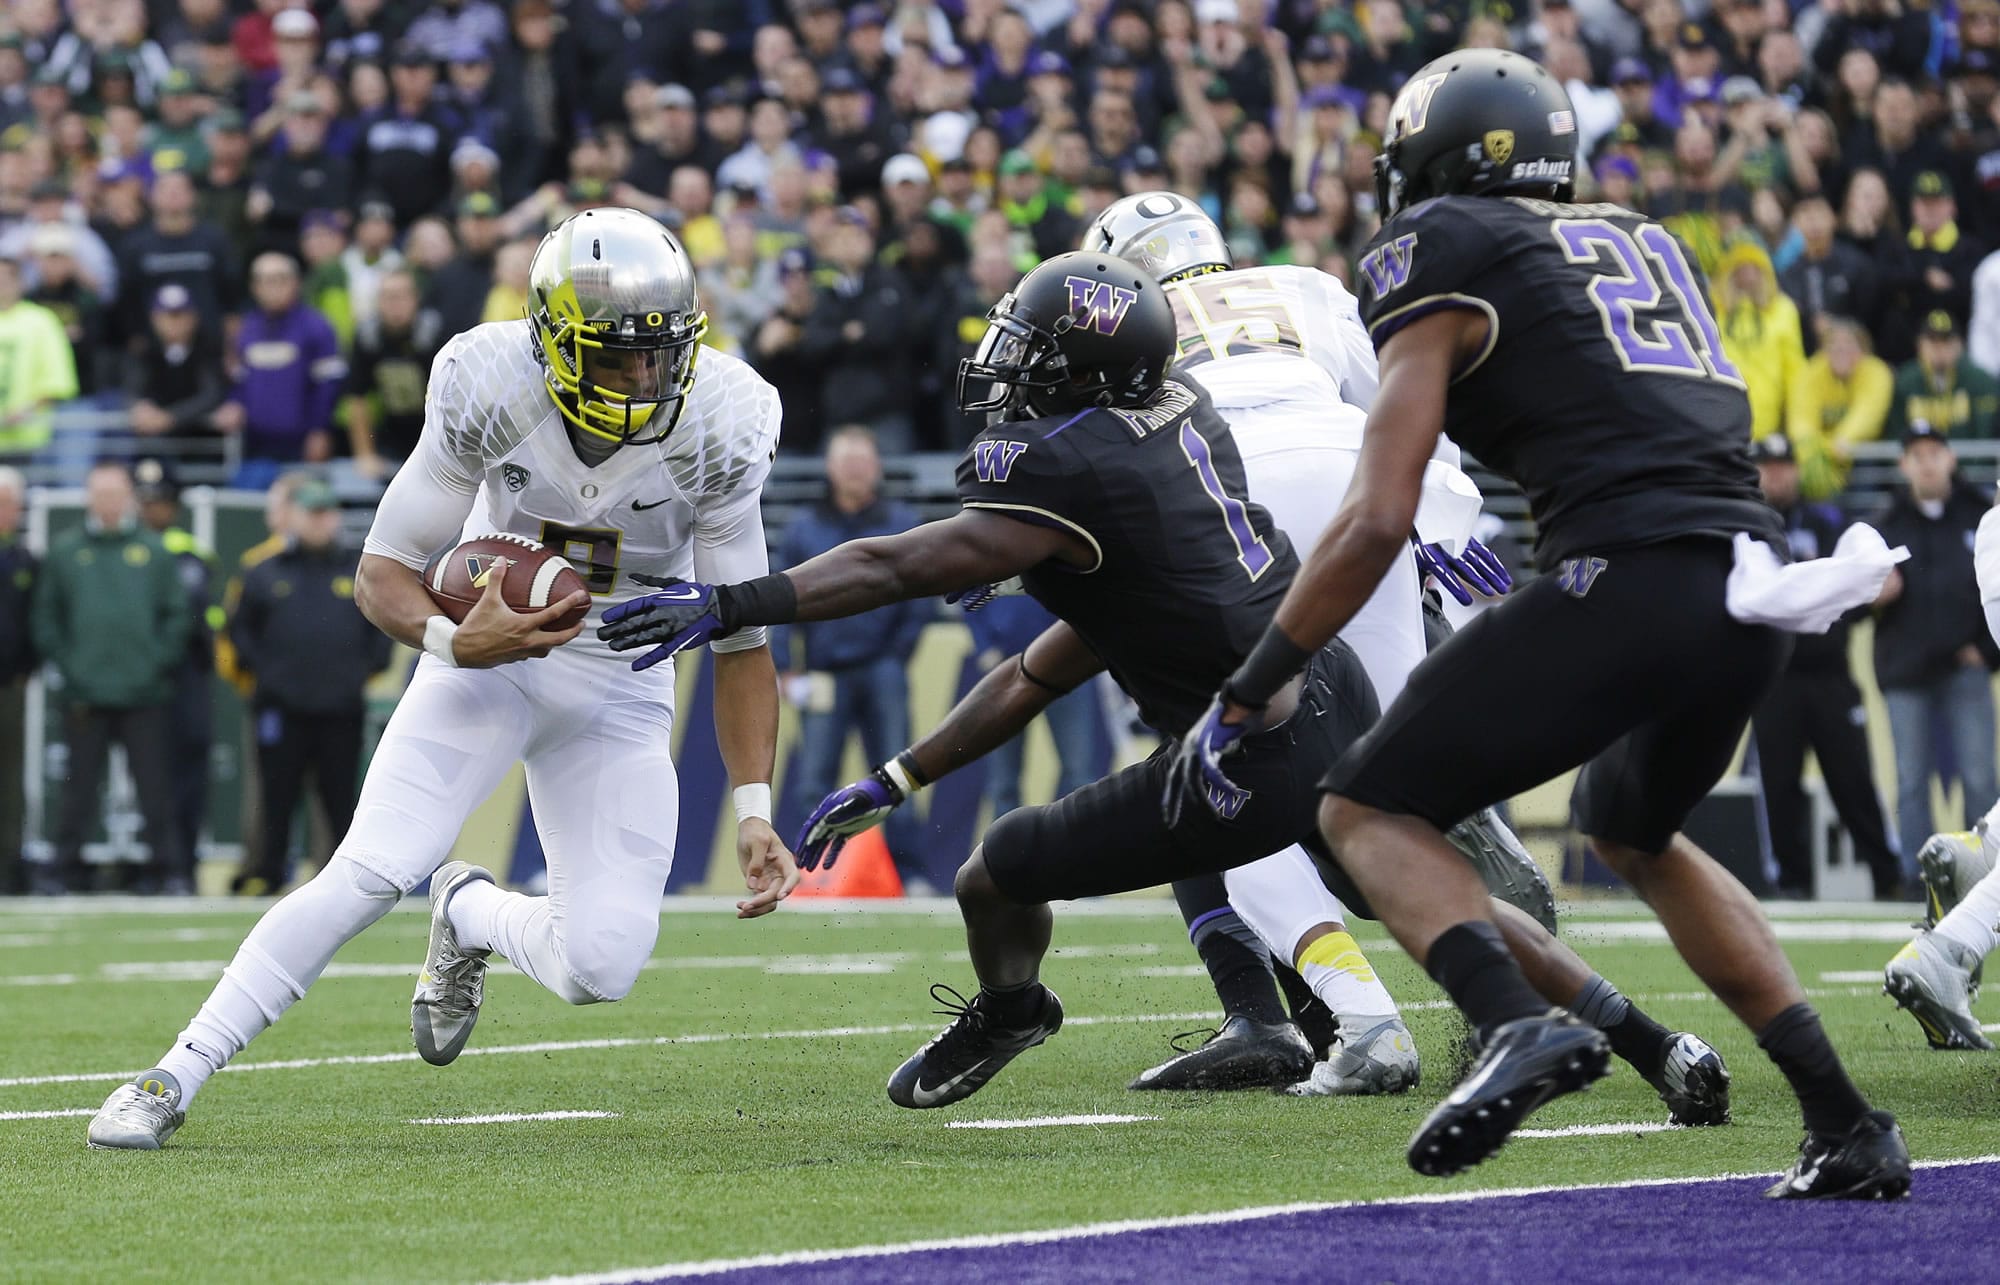 Oregon quarterback Marcus Mariota, left, runs the ball on a keeper play against Washington in the first half of an NCAA college football game, Saturday, Oct. 12, 2013, in Seattle. Mariota was stopped short of the goal line, but Oregon scored a touchdown on the next play. (AP Photo/Ted S.